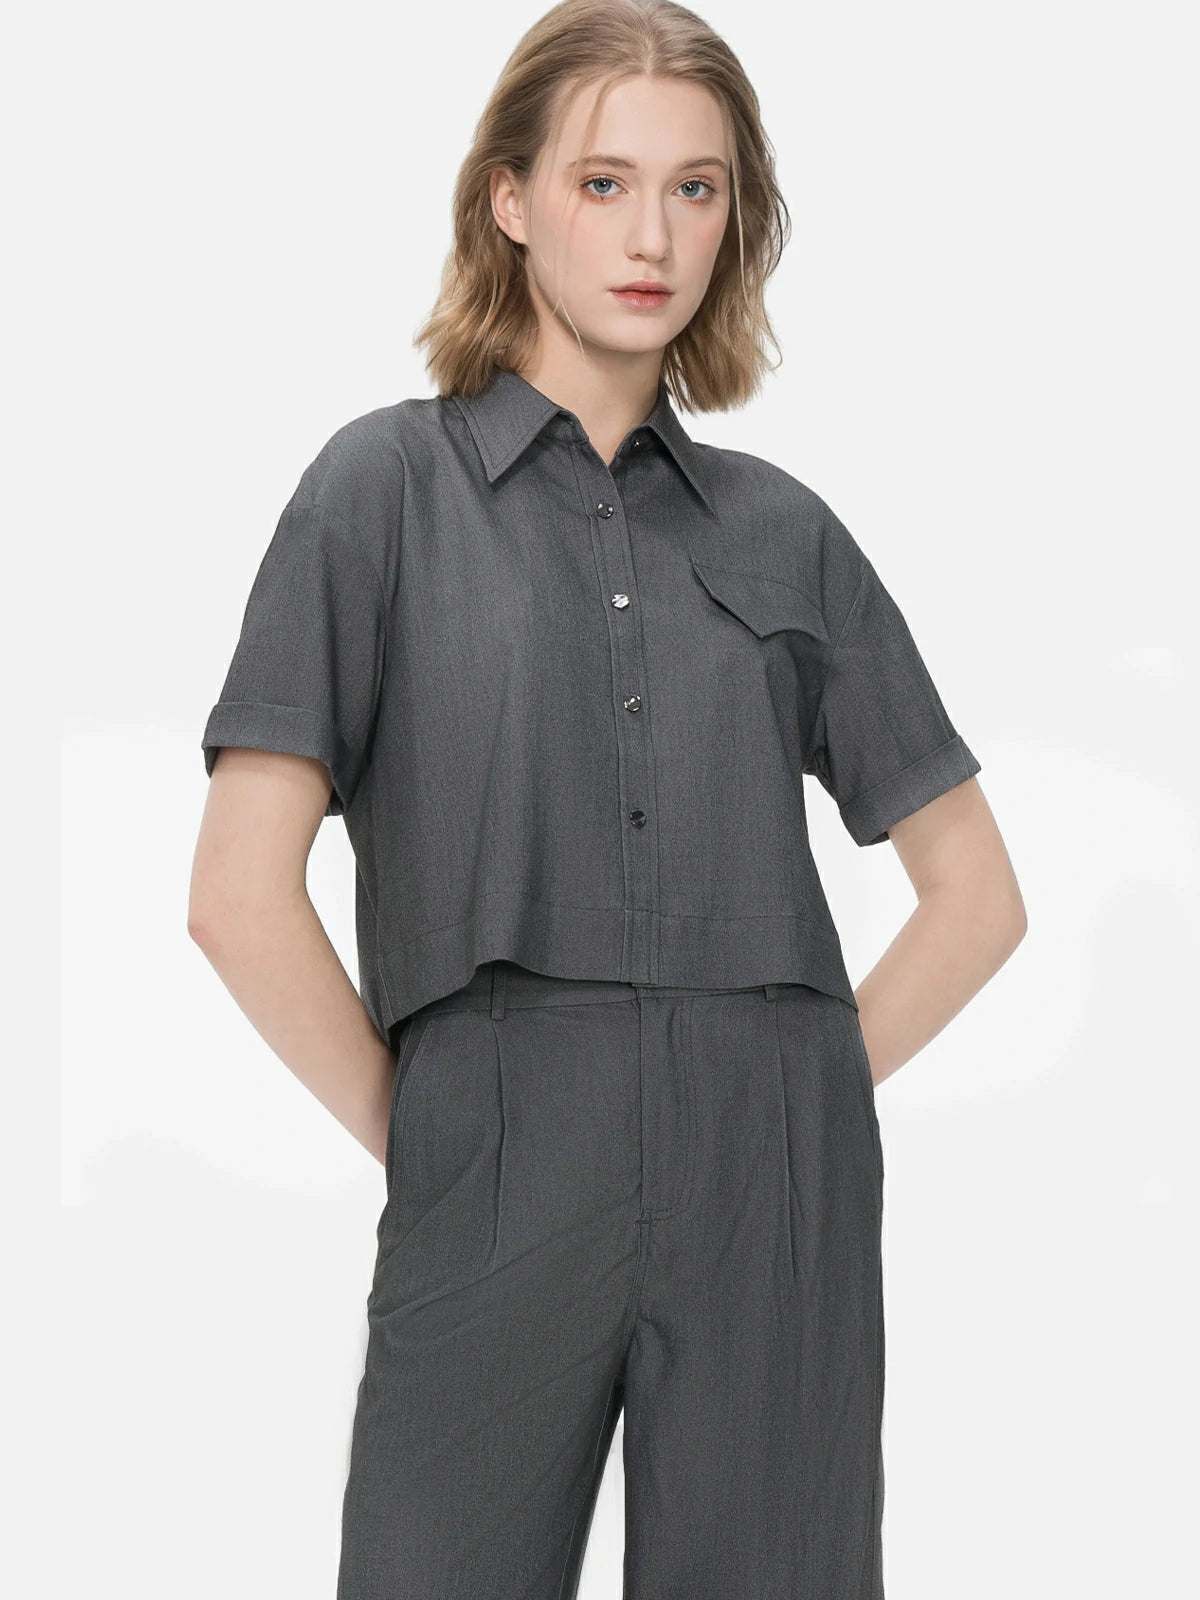 Faux pocket patchwork lapel collar shirt with rolled cuff design, combining unique aesthetics with casual comfort for a fashionable summer look.